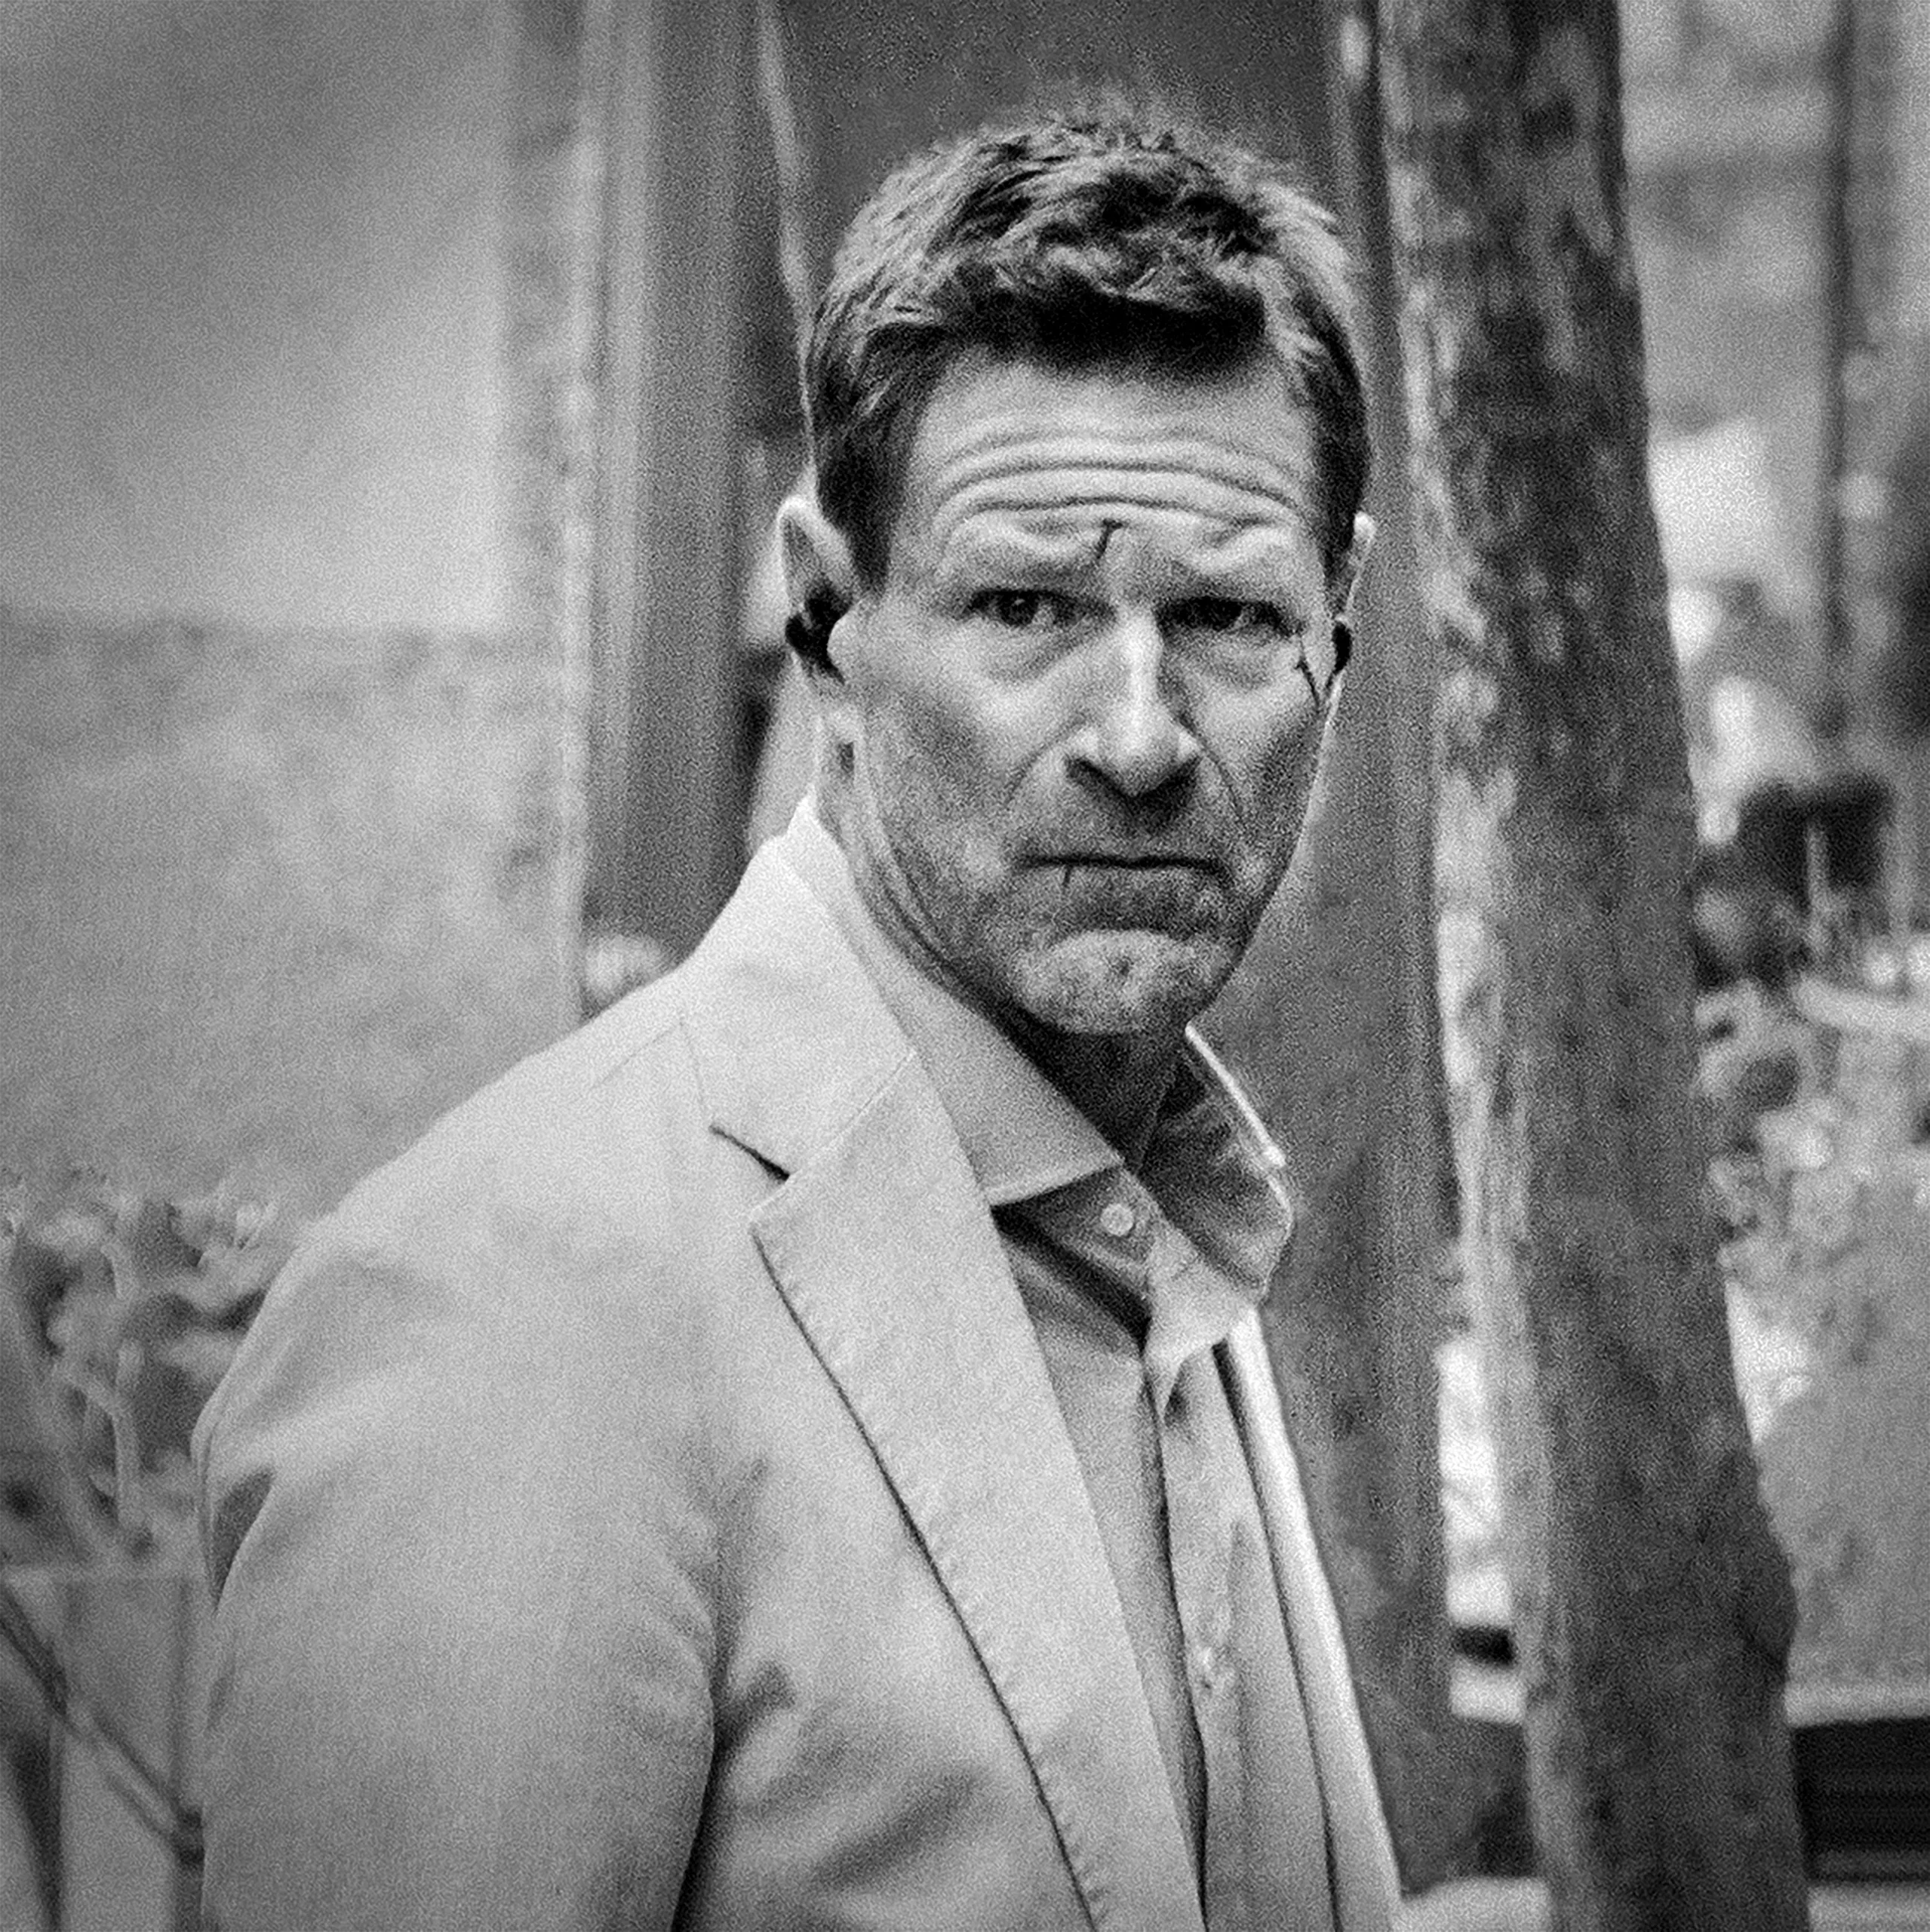 Aaron Eckhart in the The Bricklayer in Thessaloniki Greece - Photos by Alkis Ishnopoulos